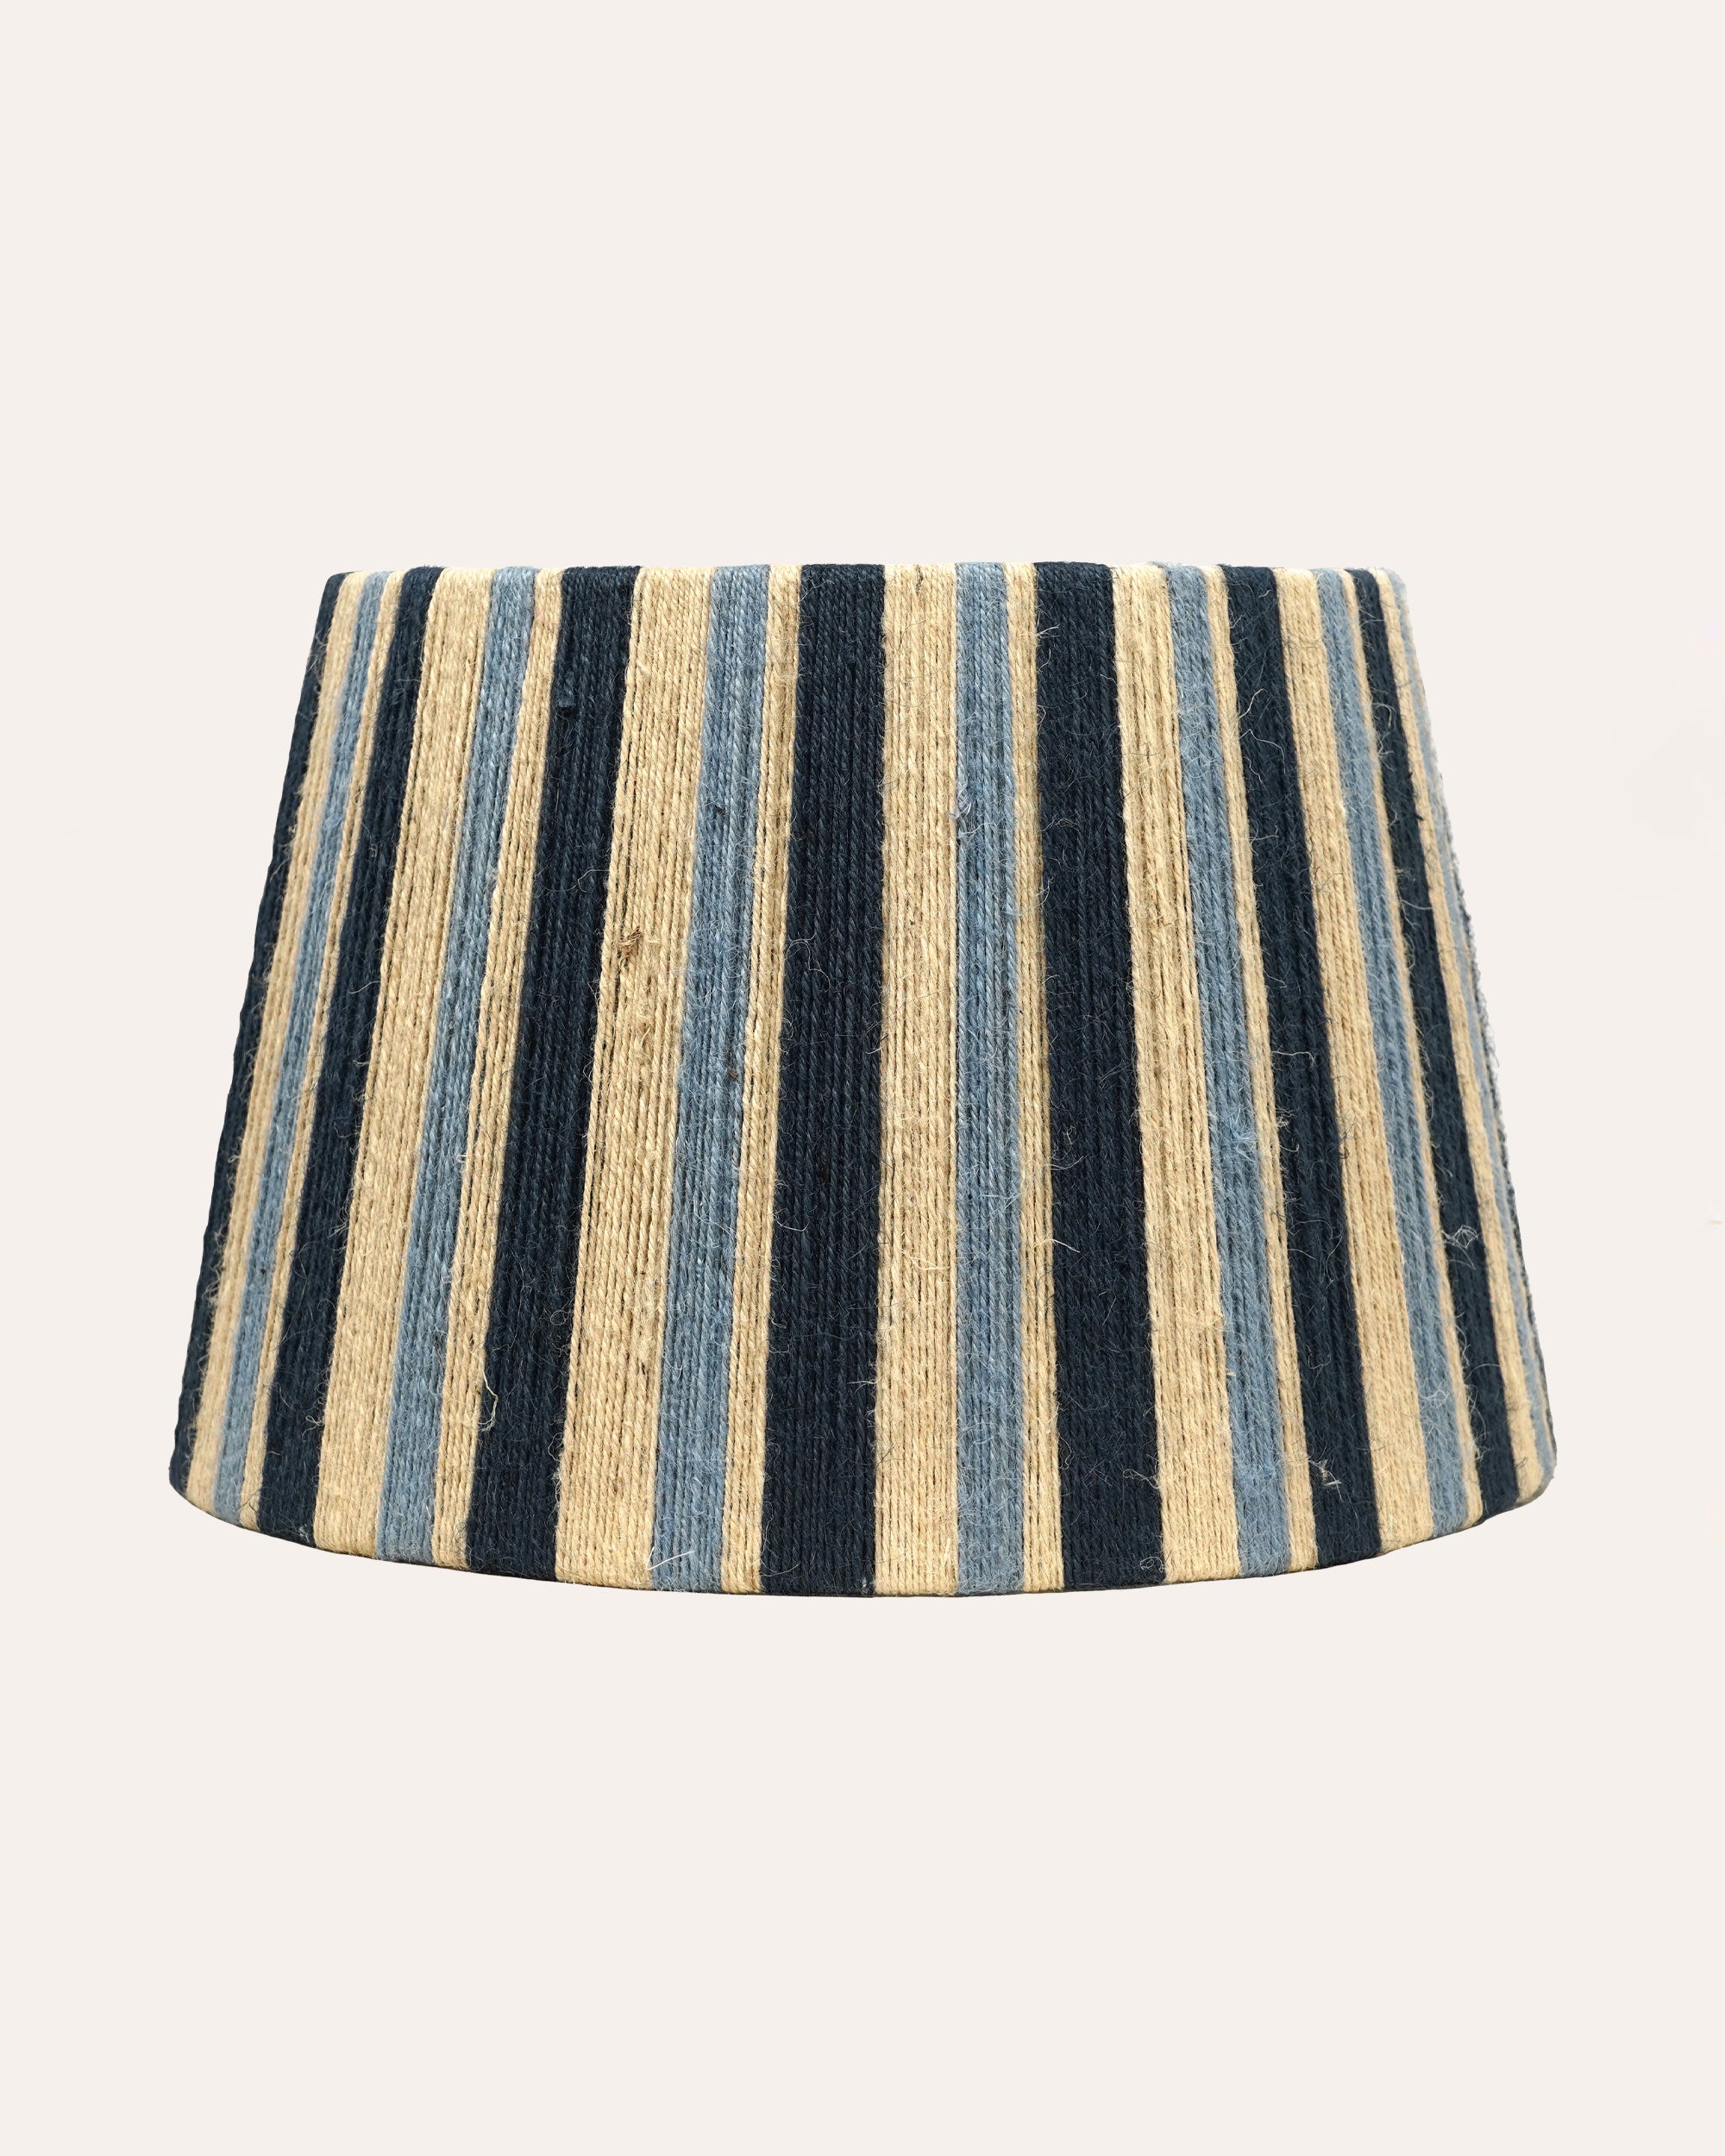 The Stripey String Lampshade - The Blue